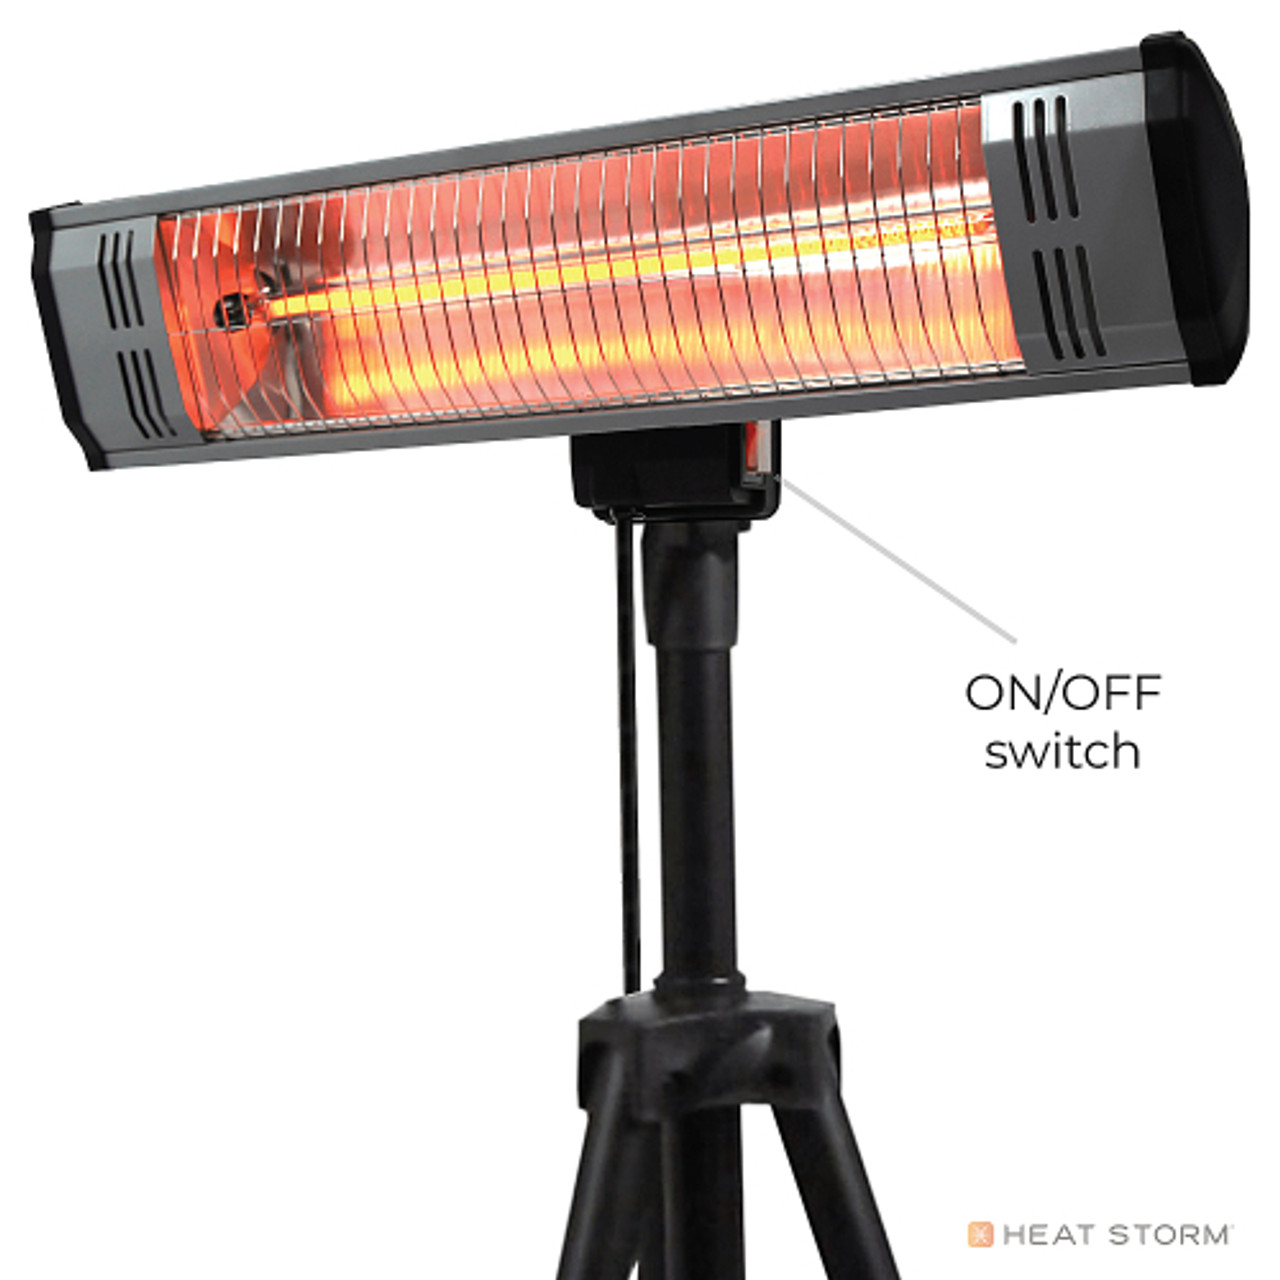 EnergyWise - Infrared Heater and Tripod combo - SILVER